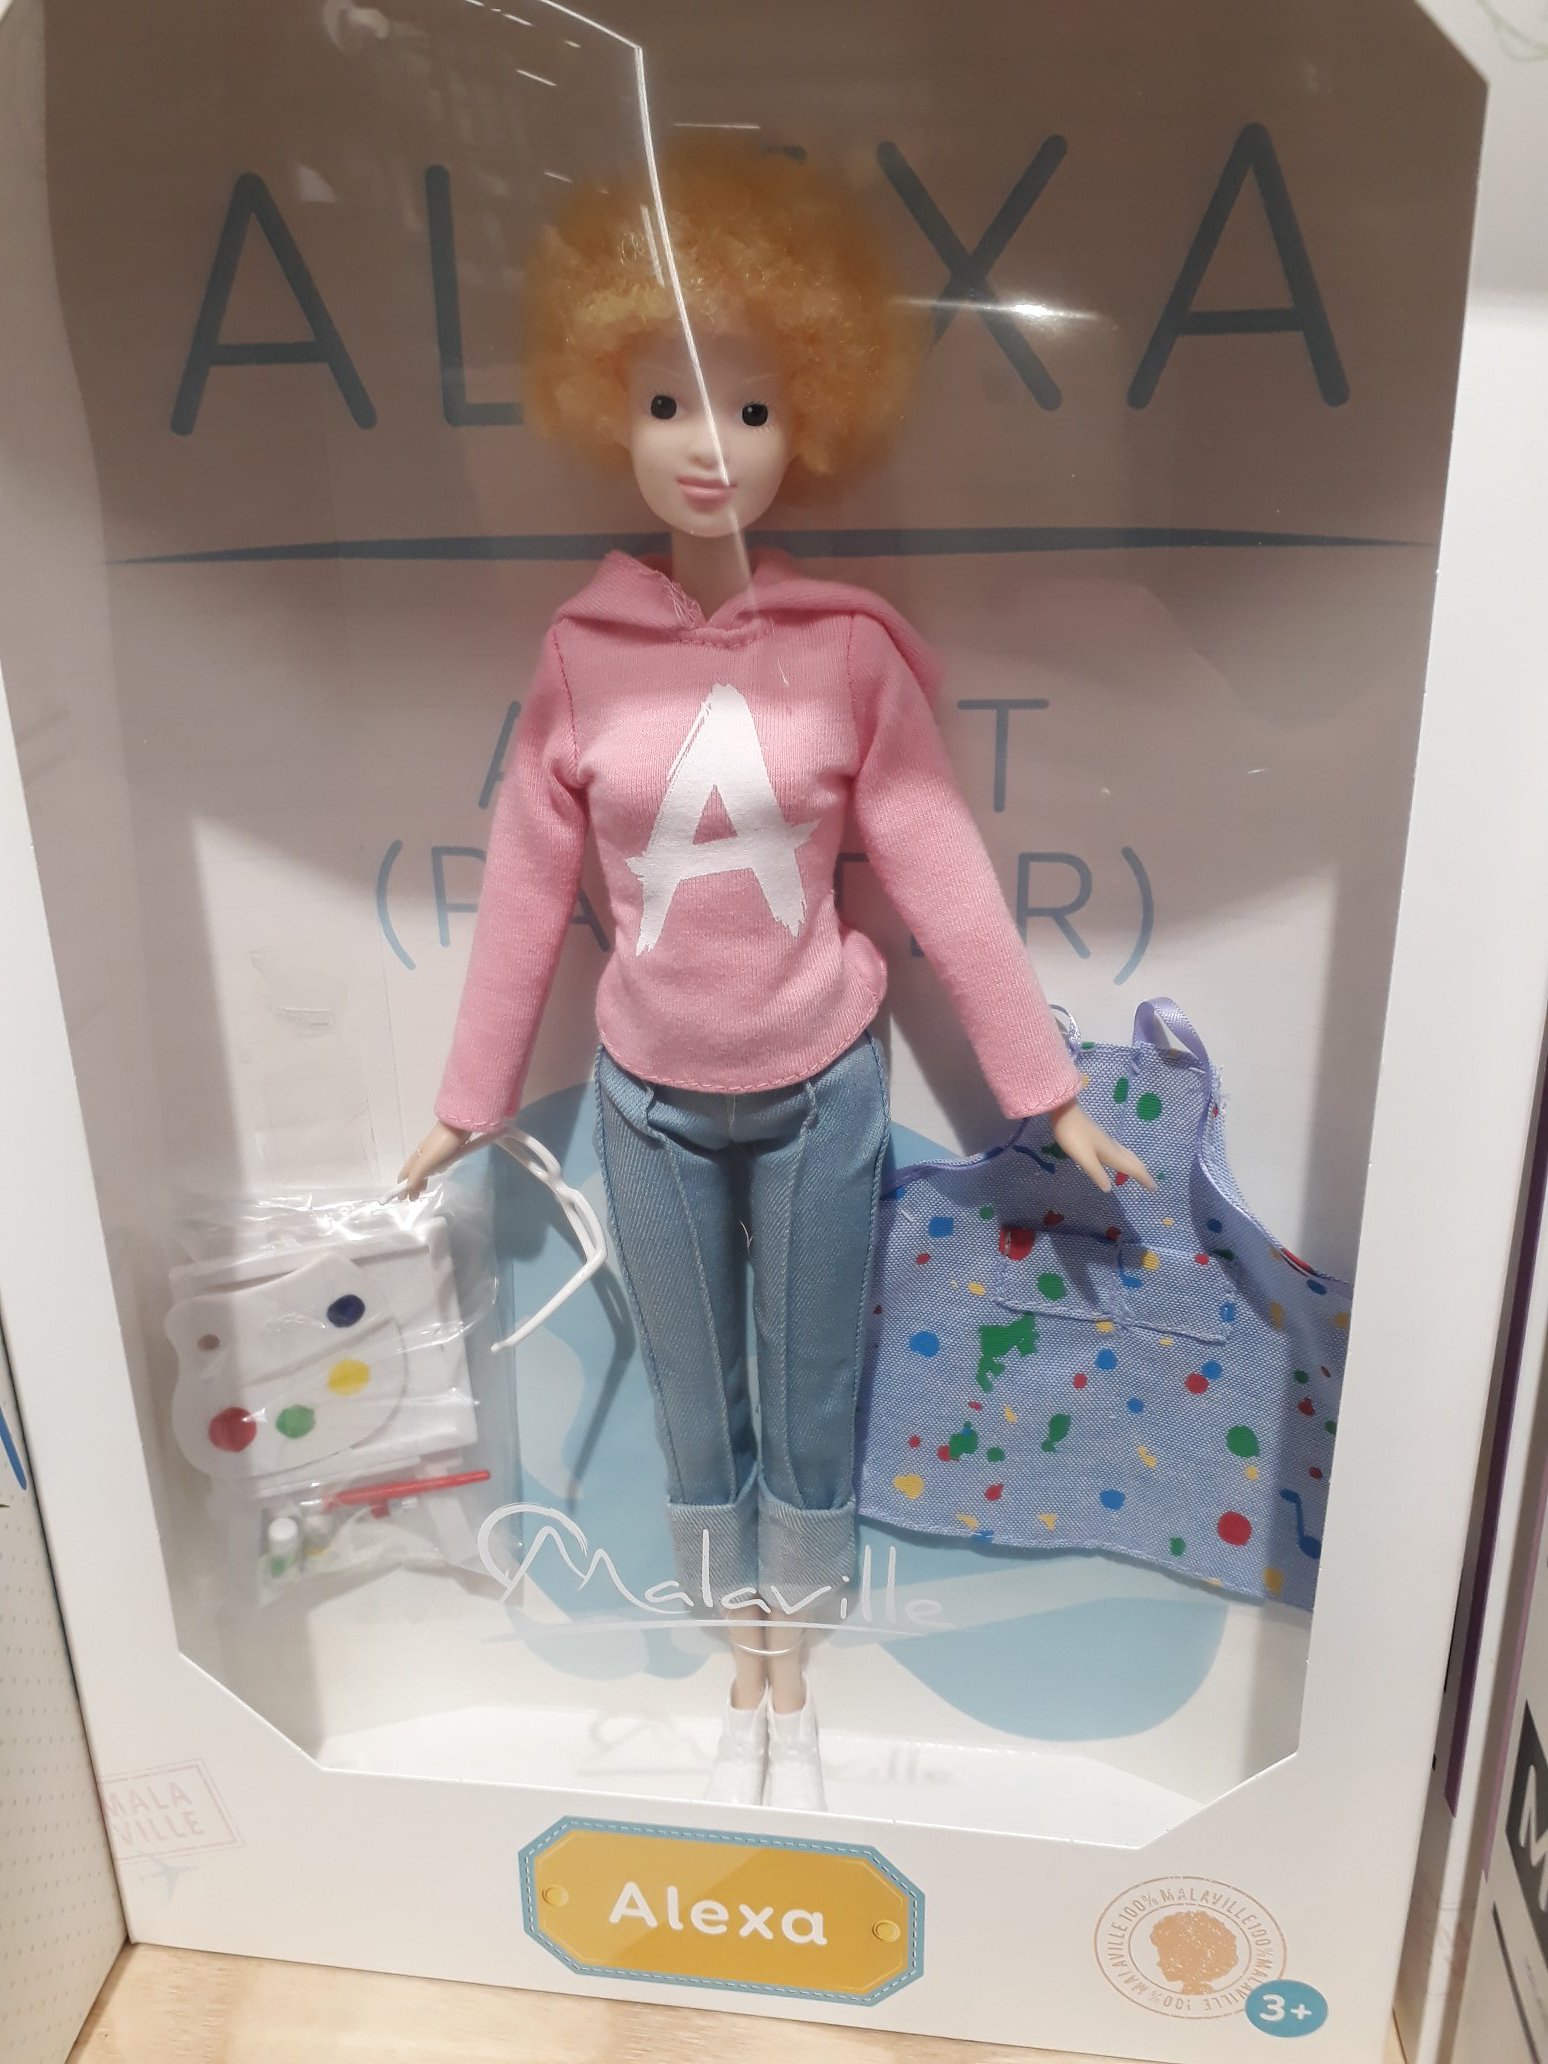 Continent inflatie Pijlpunt Kate Bartlett on Twitter: "Very happy to see an albino 'Barbie' in South  African shops. A good initiative. https://t.co/yoY6gIDwaP" / Twitter